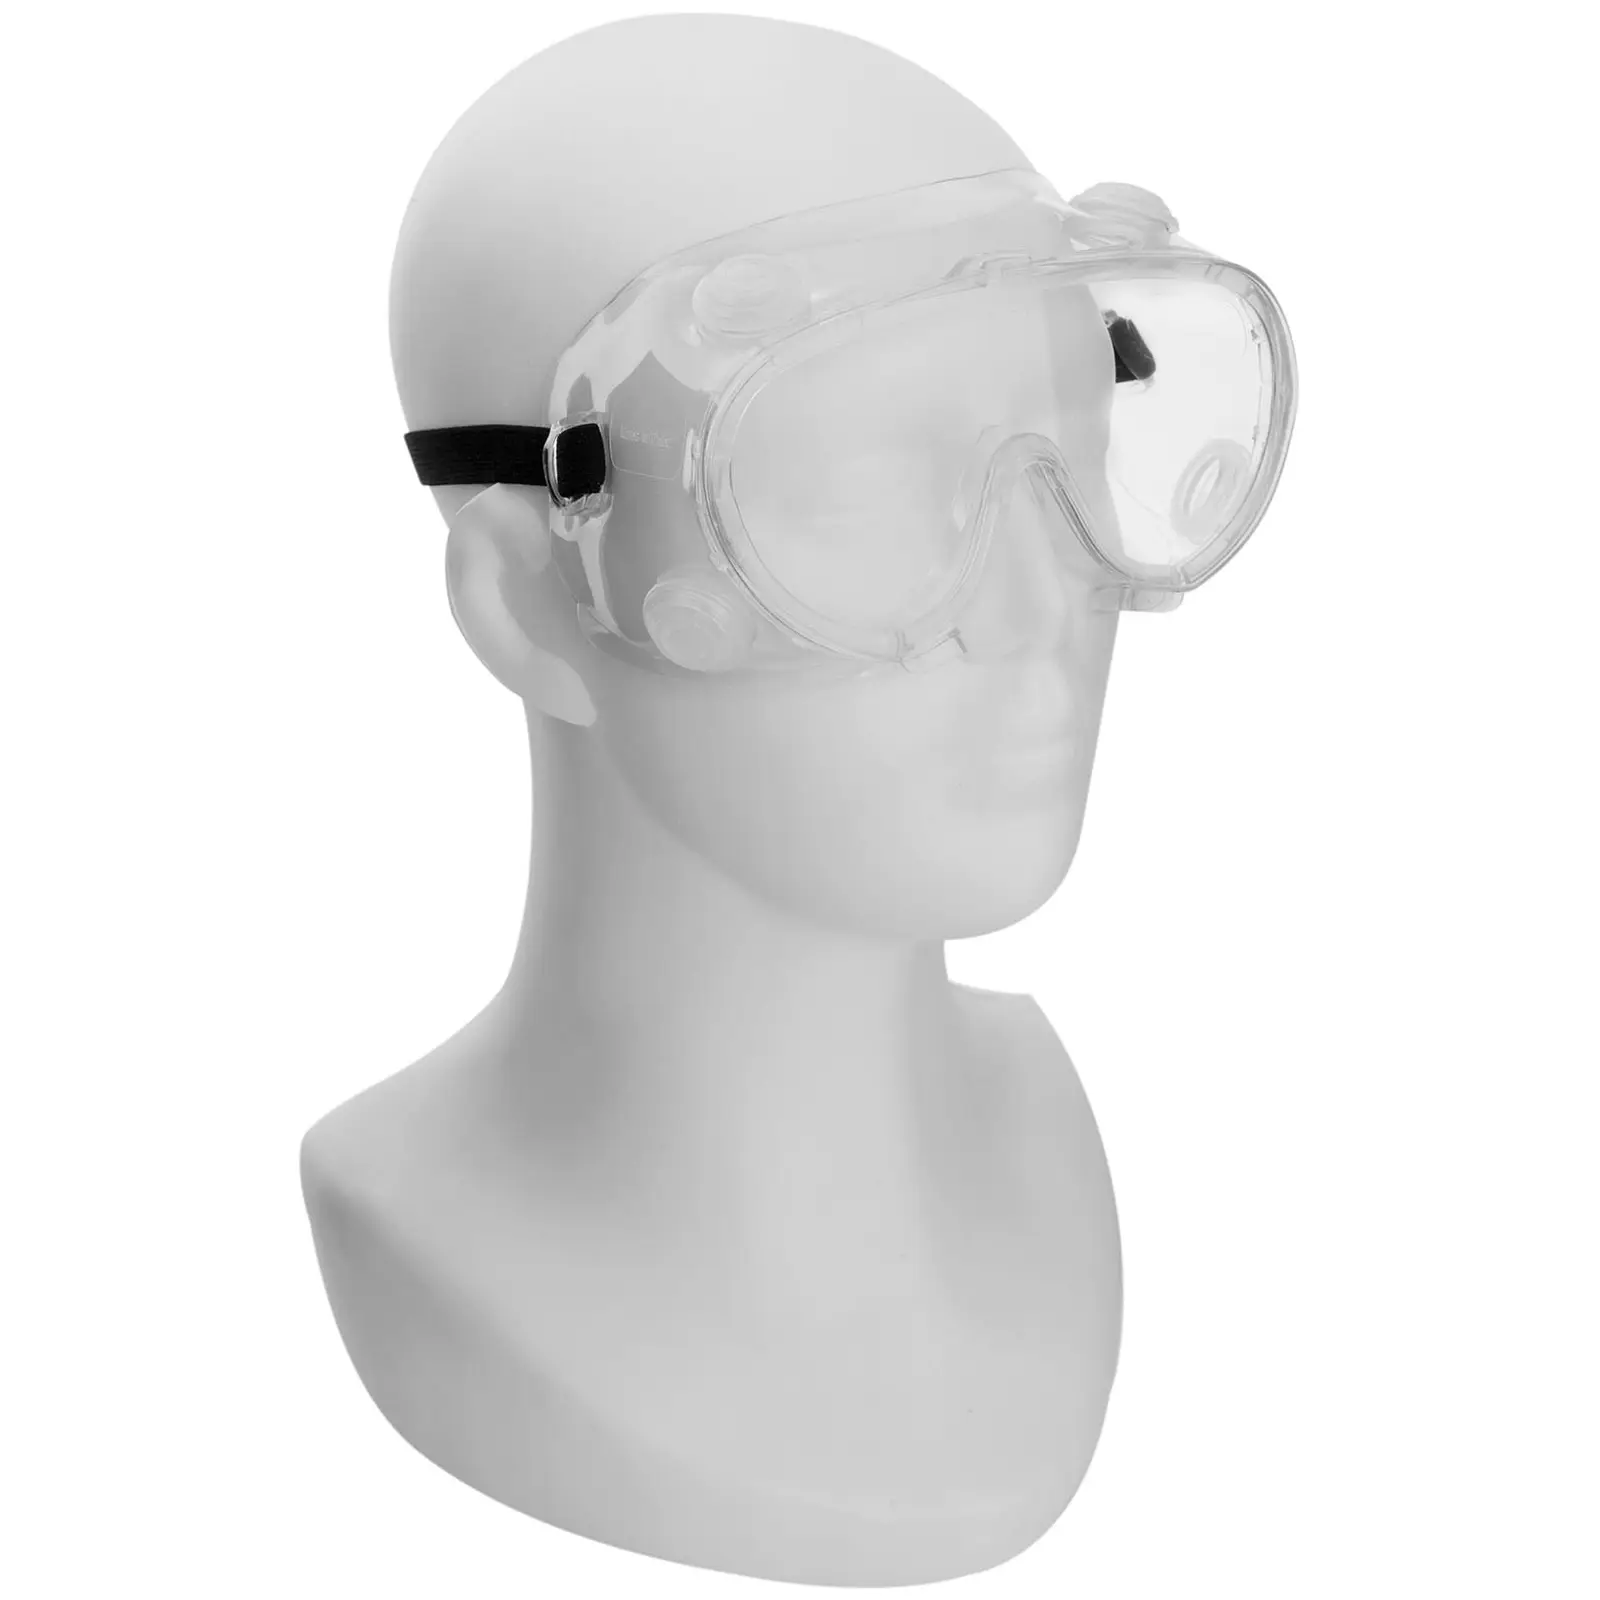 Safety Glasses - set of 10 - clear - one size